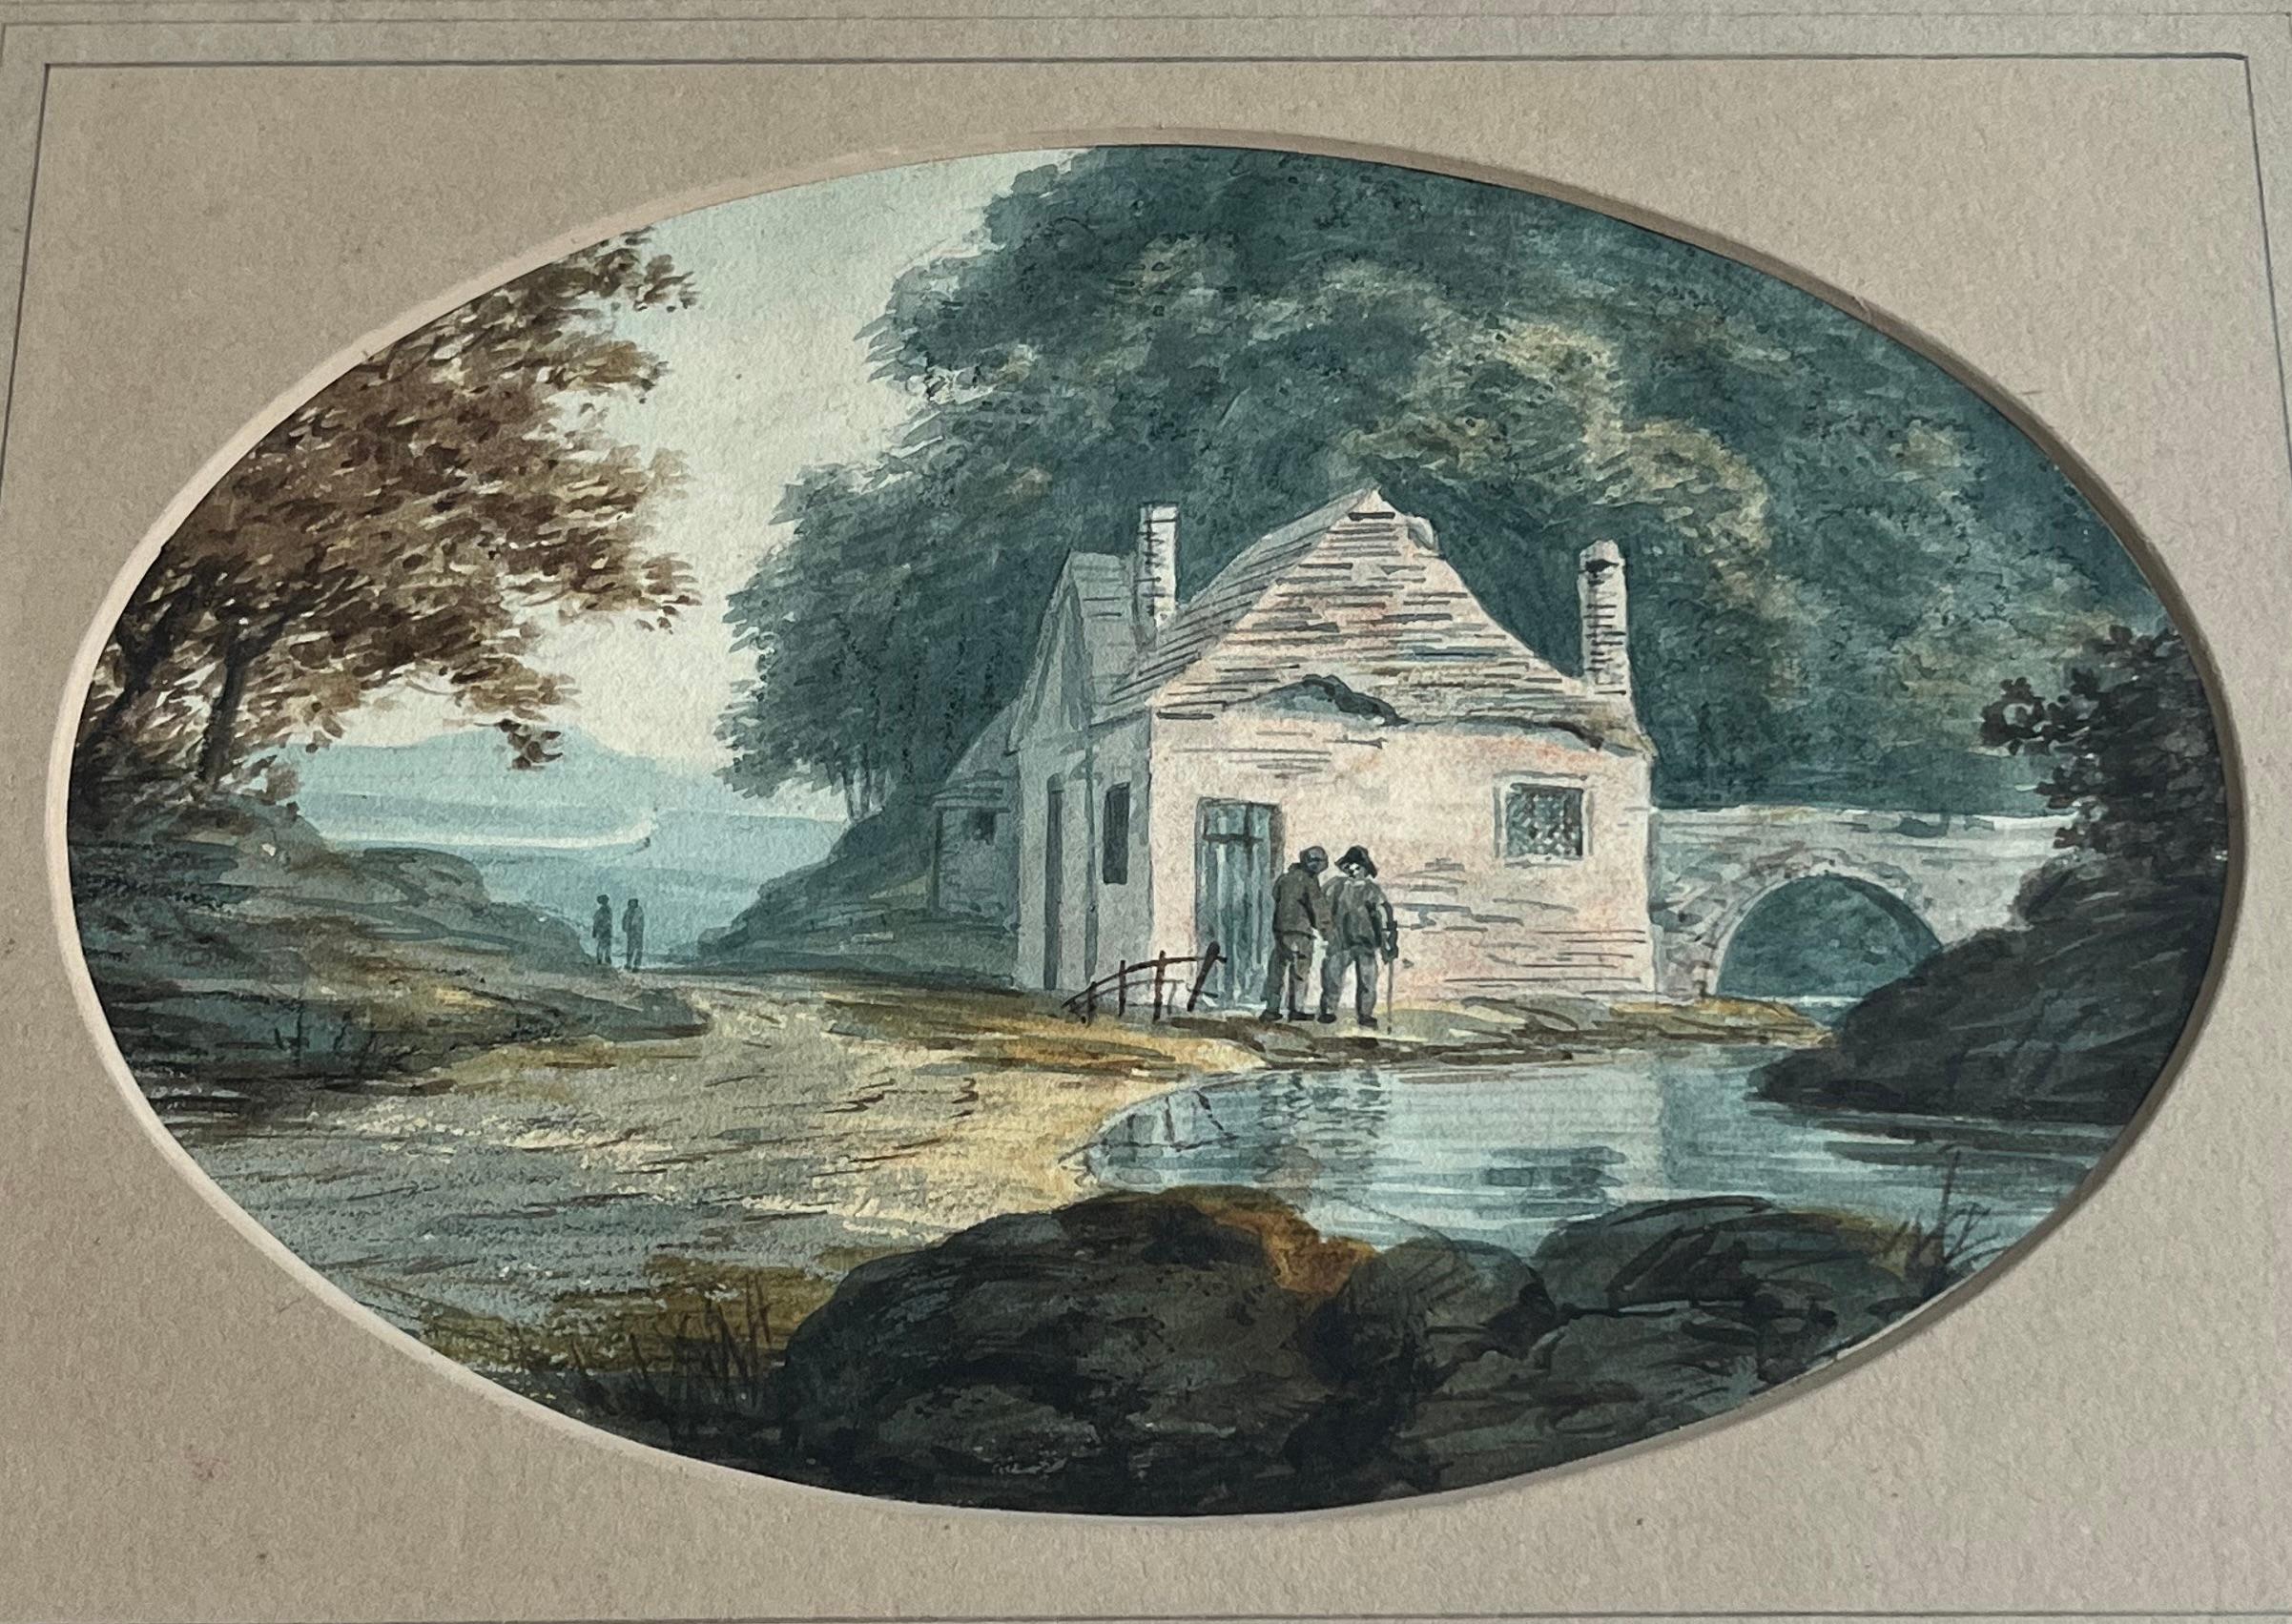 Early English watercolour, Figures chatting by a cottage near a river - École anglaise Art par William Payne